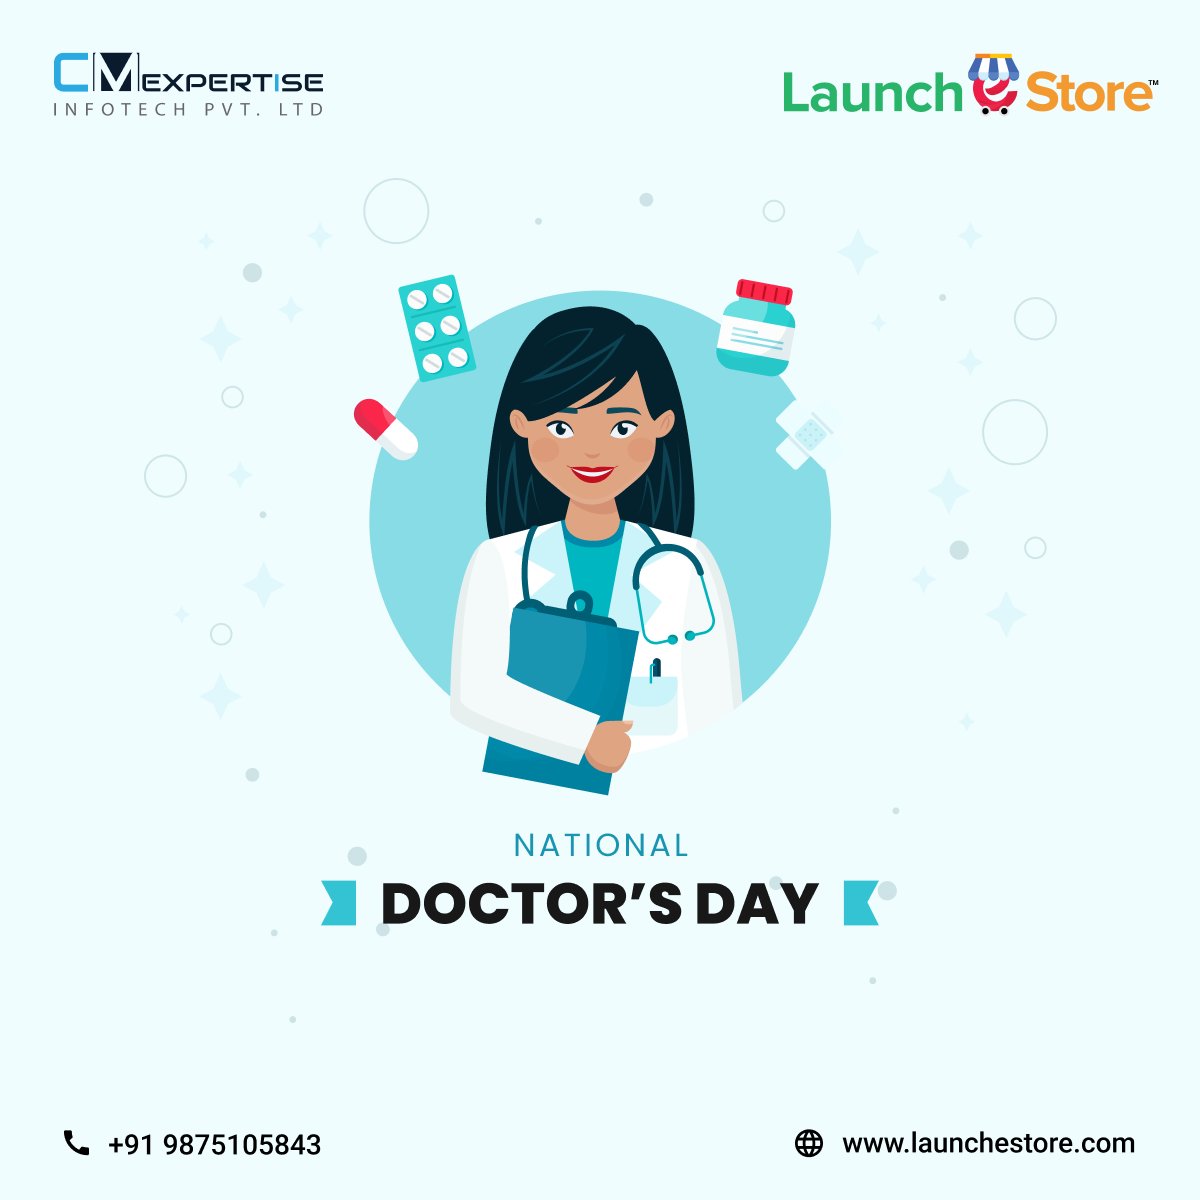 Happy National Doctors Day!
Saluting healthcare heroes on #DoctorsDay!

We're grateful to the selfless doctors and our @launchestore team who support them with top-notch web and app development.

#happydoctorsday #launchestore #doctorsofinstagram #festivalofhope #TogetherStronger